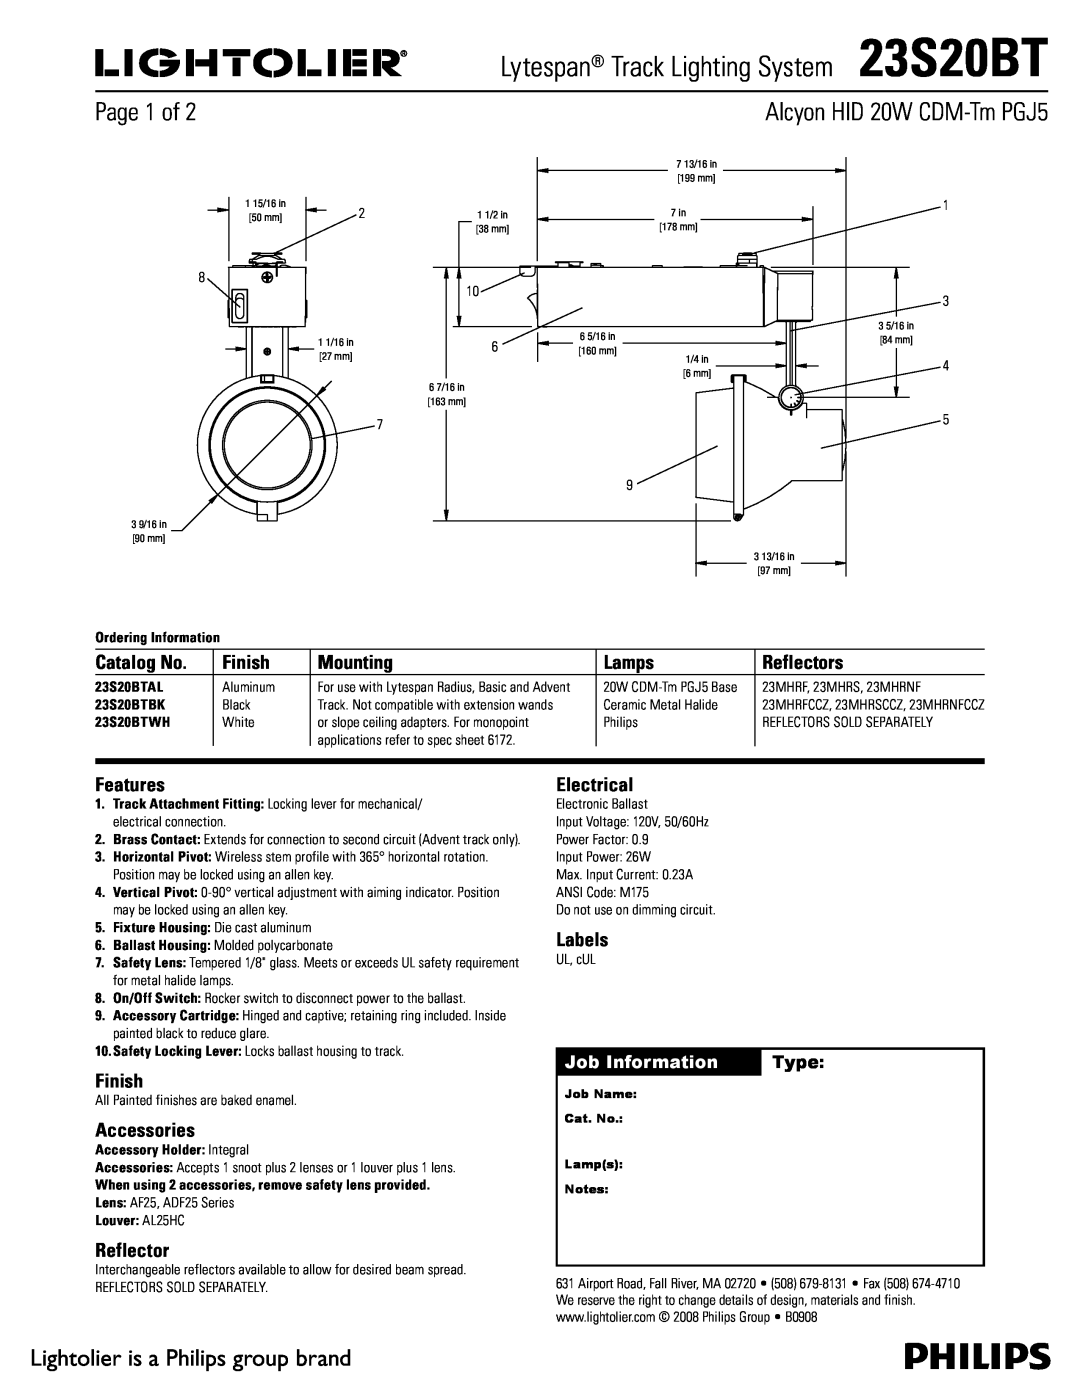 Lightolier manual Lytespan Track Lighting System23S20BT, Page 1 of, Lightolier is a Philips group brand, Catalog No 